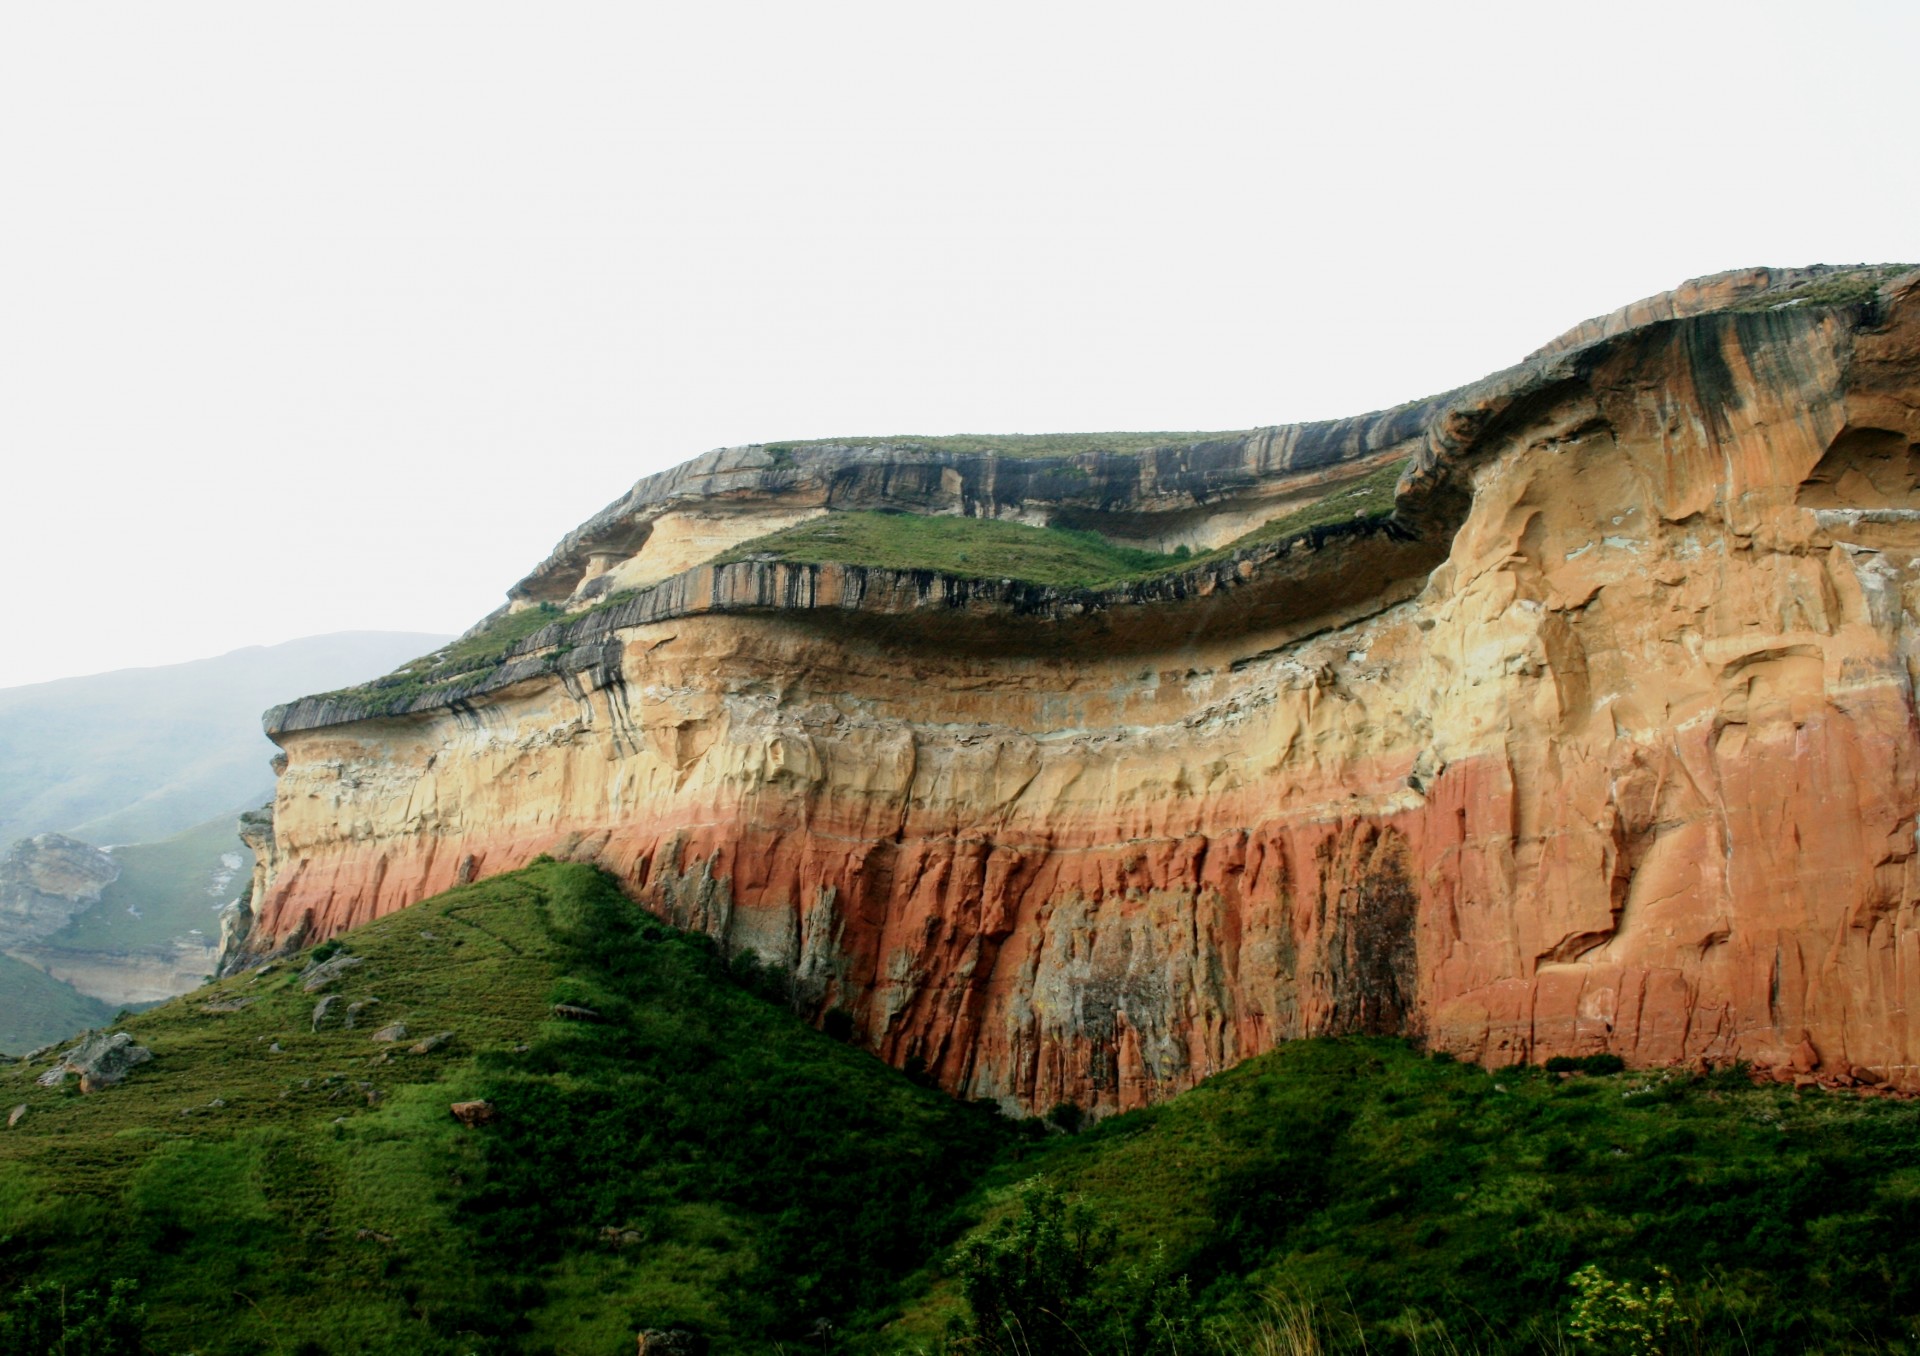 Sandstone cliff face, Golden Gate National Park, Free State, S Africa.